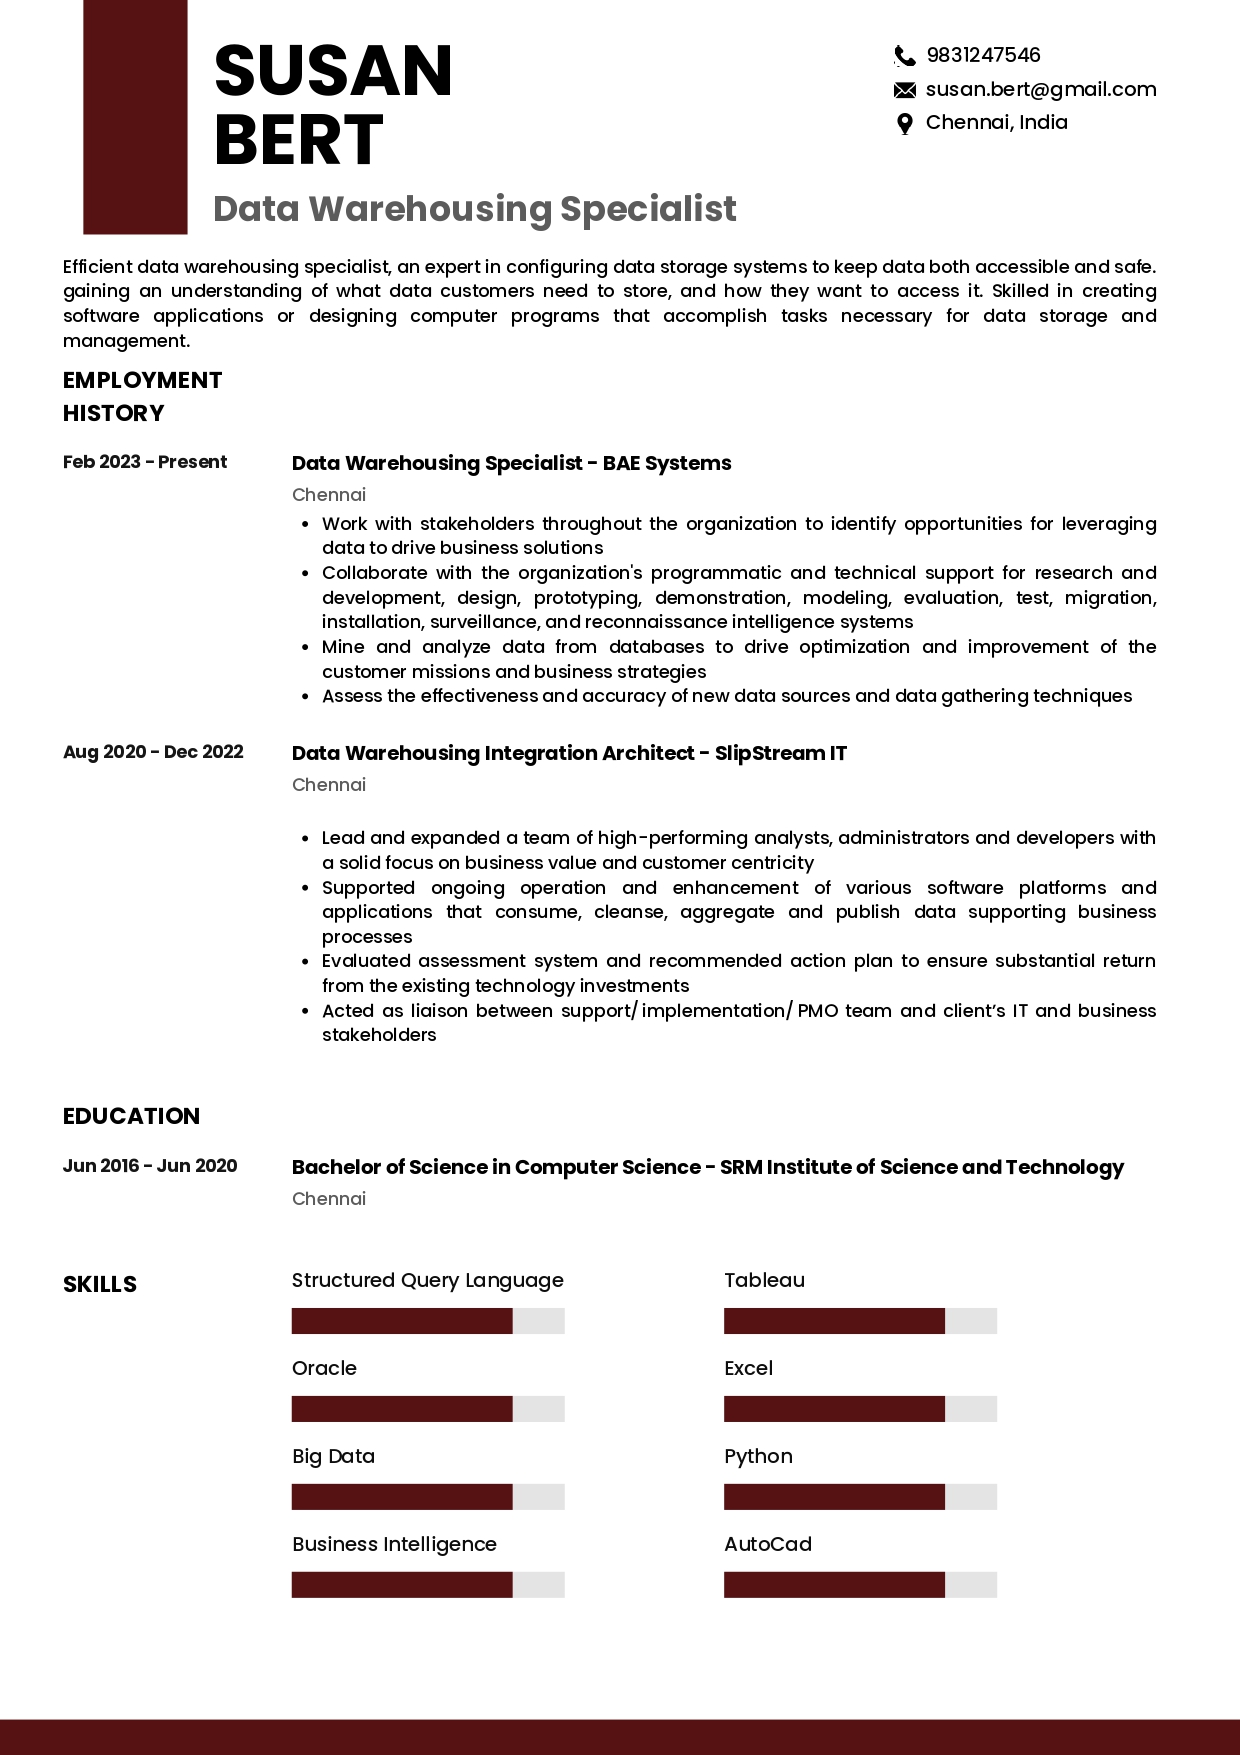 Sample Resume of  Data Warehousing Specialist | Free Resume Templates & Samples on Resumod.co